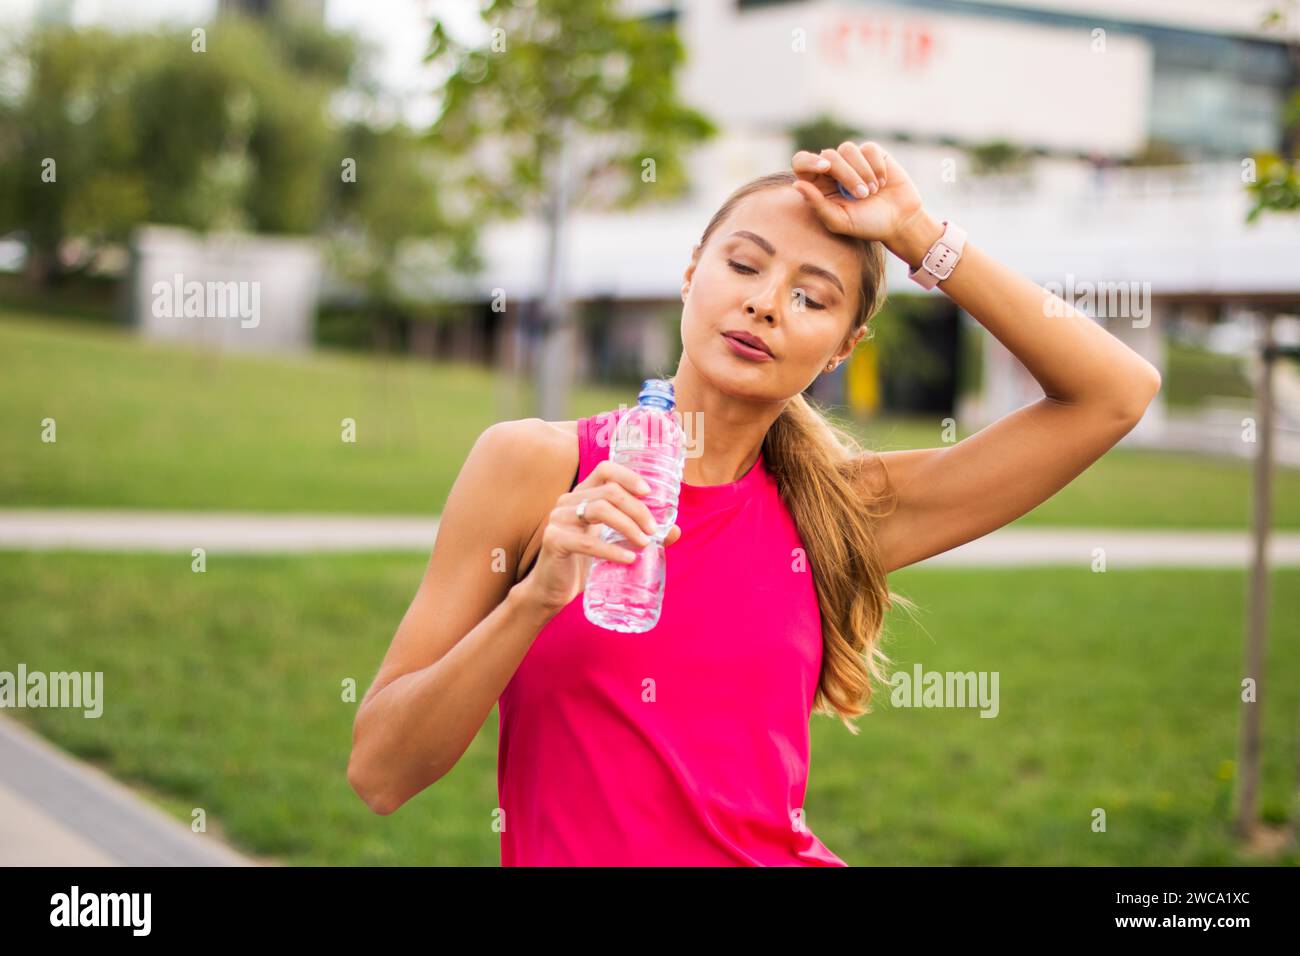 Woman drinking water after running outdoor, rehydration concept Stock Photo